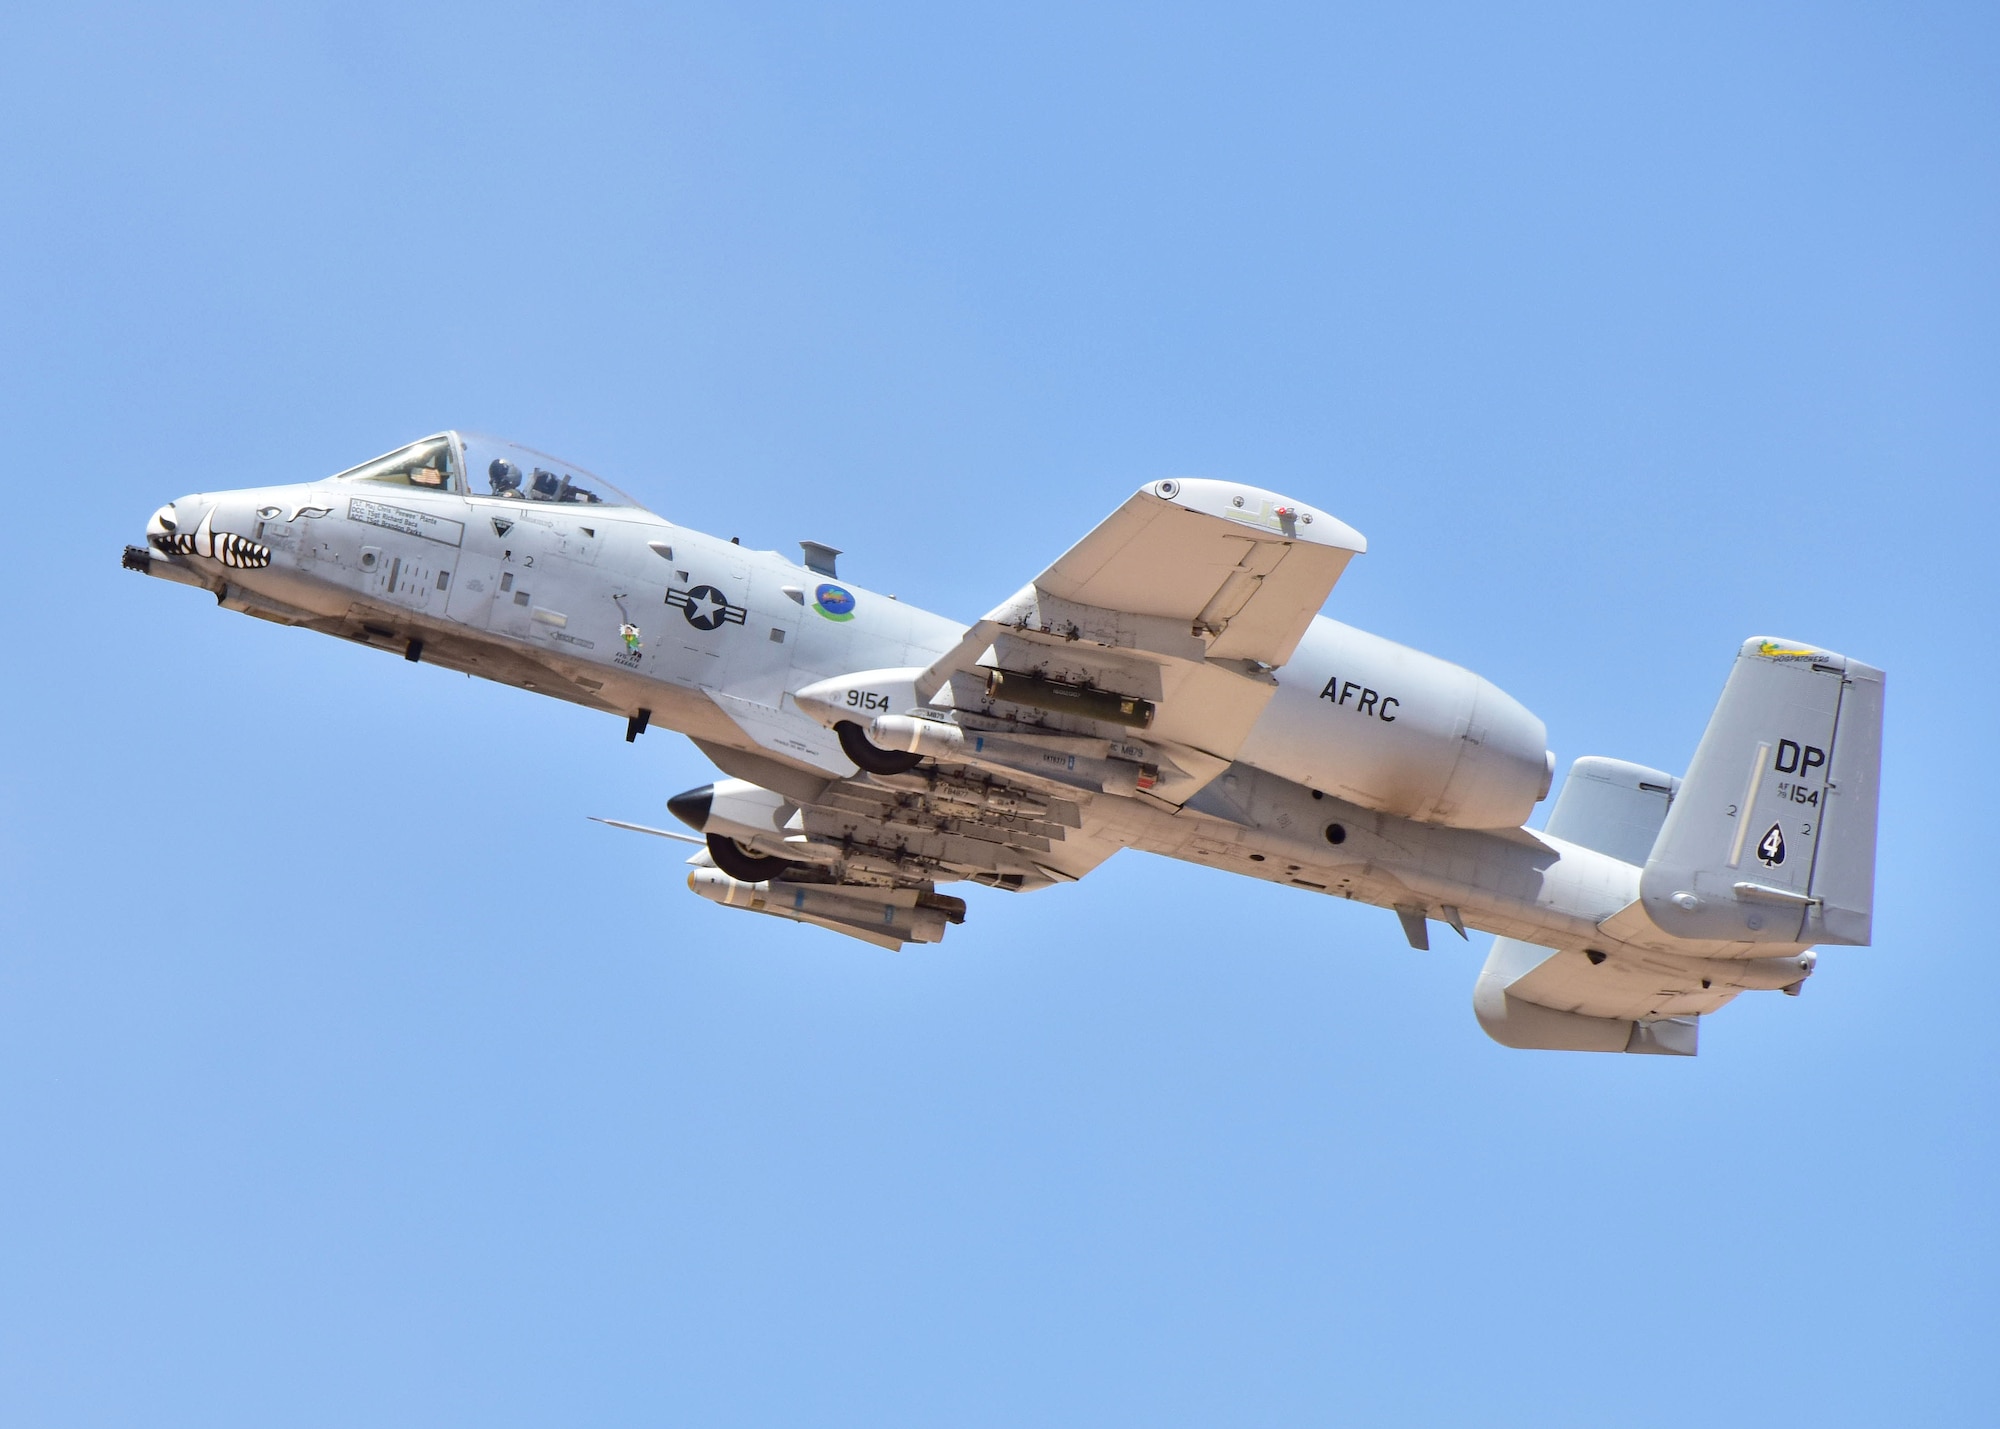 An A-10C Thunderbolt II assigned to the 924th Fighter Group, Davis-Monthan Air Force Base, Ariz., performs a flying maneuver during the 2016 Hawgsmoke competition at Barry M. Goldwater Range, Ariz., June 2, 2016. The first Hawgsmoke competition began in 2002 where A-10 units across the globe competed in ground attacks and target destruction. (U.S. Air Force photo by Tech. Sgt. Louis Vega Jr.)